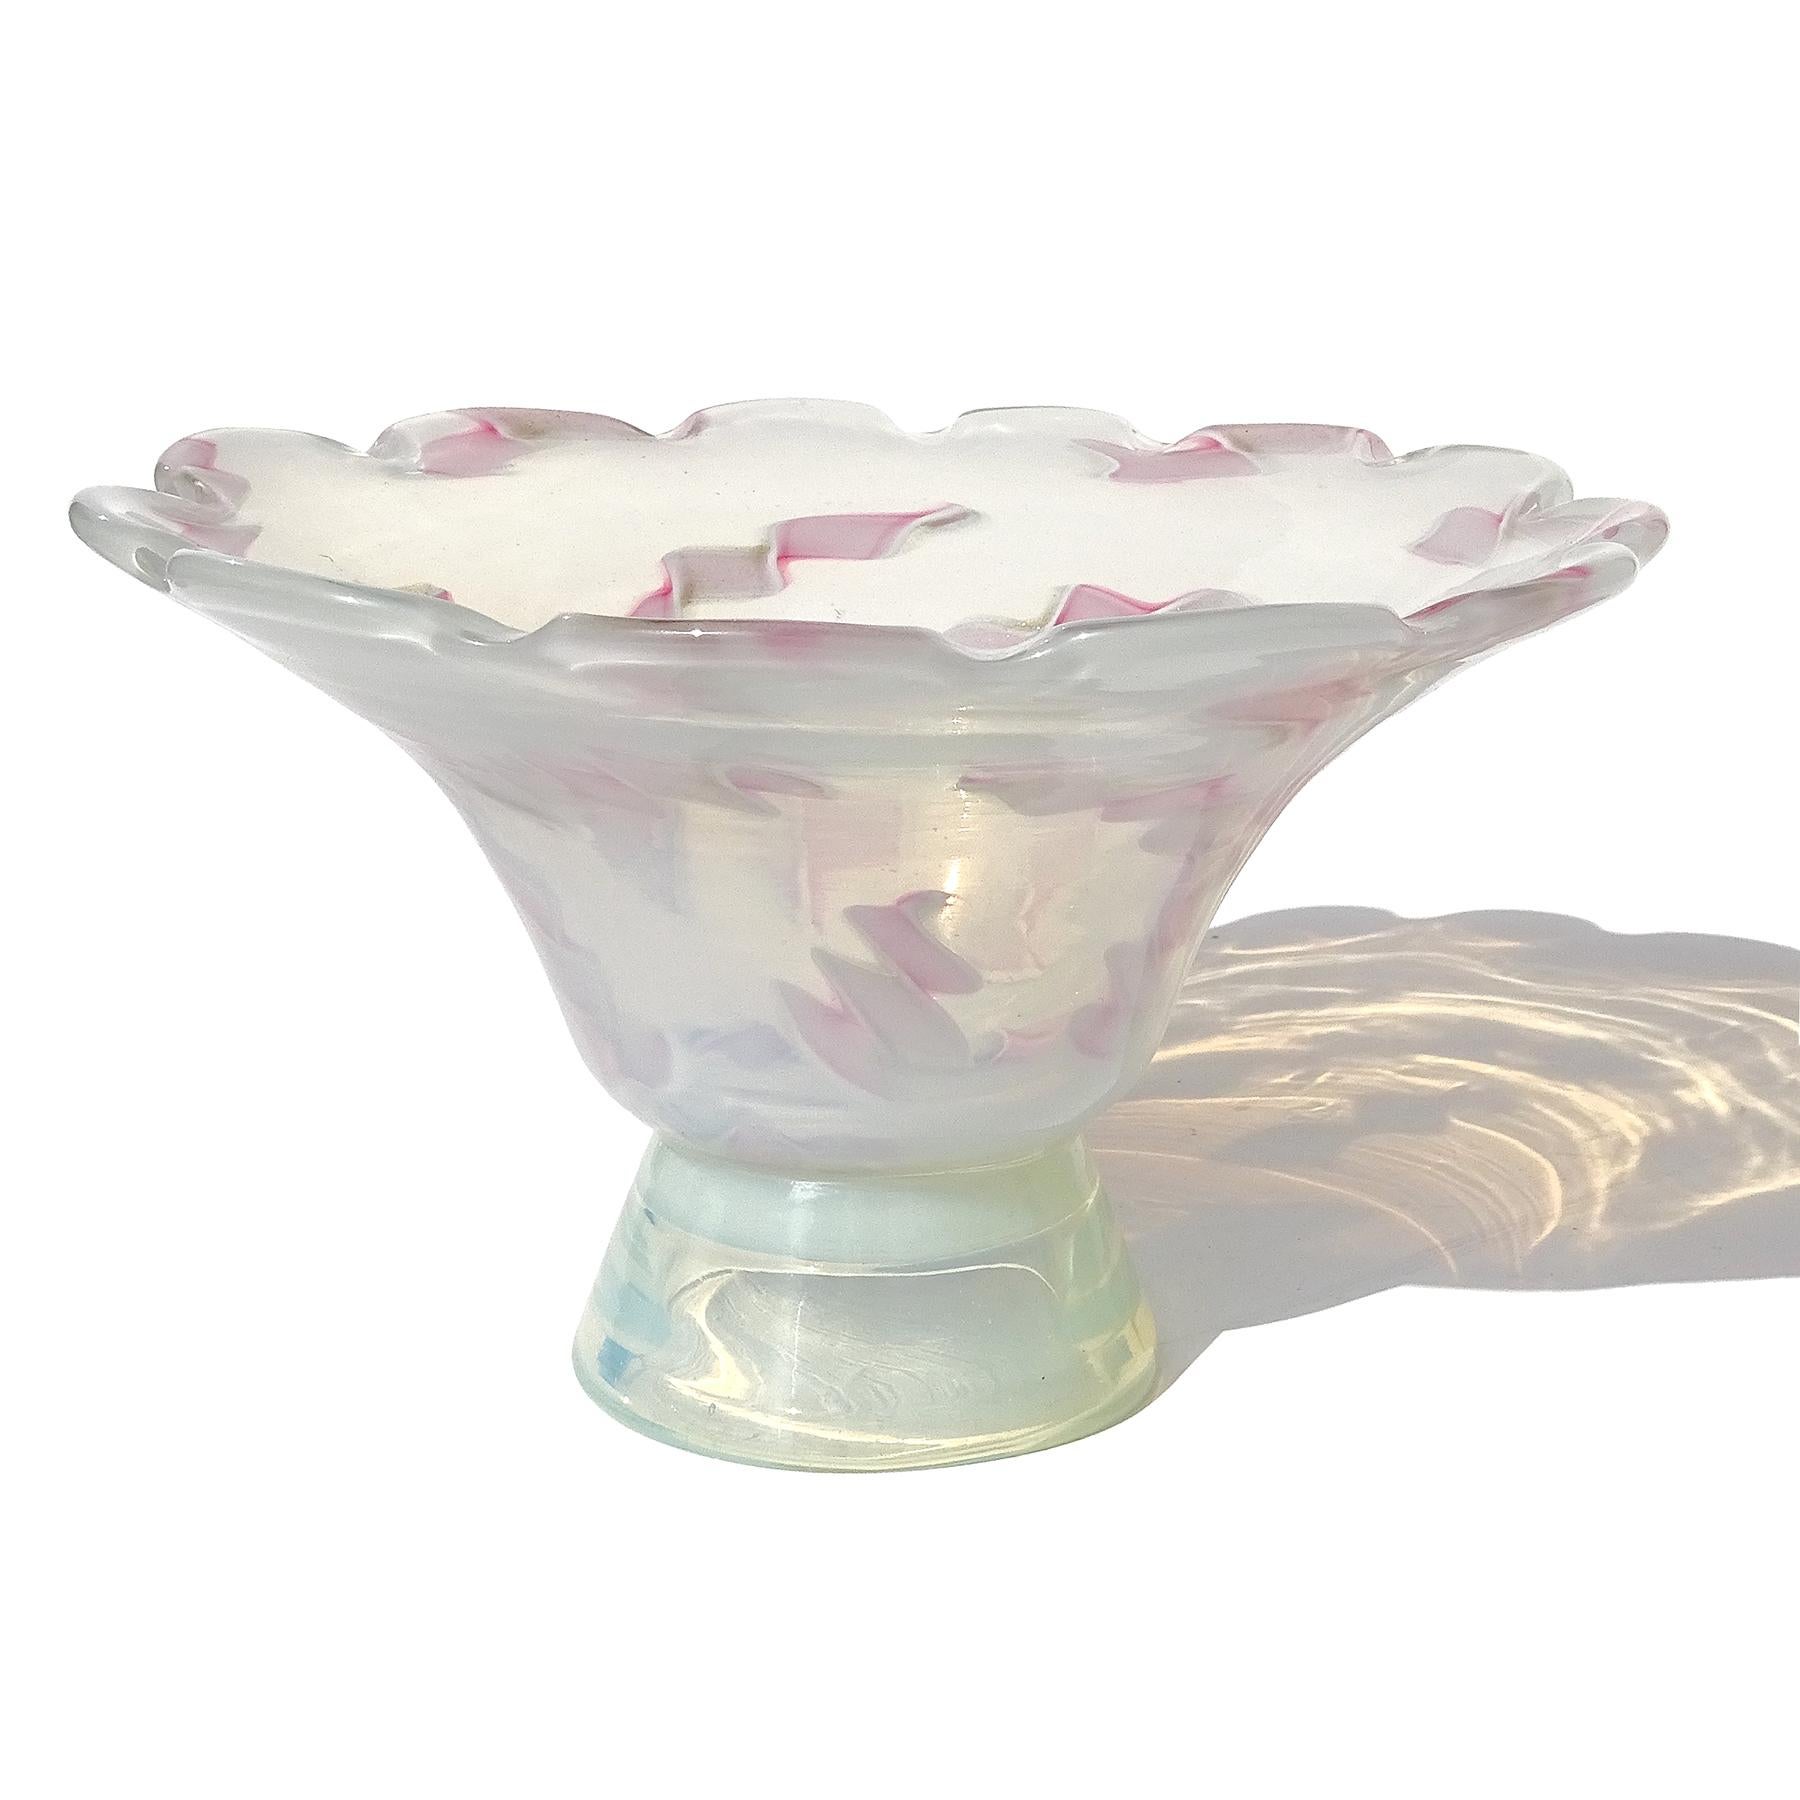 Fratelli Toso Murano Opalescent Pink Aventurine Ribbons Italian Art Glass Bowl In Good Condition For Sale In Kissimmee, FL